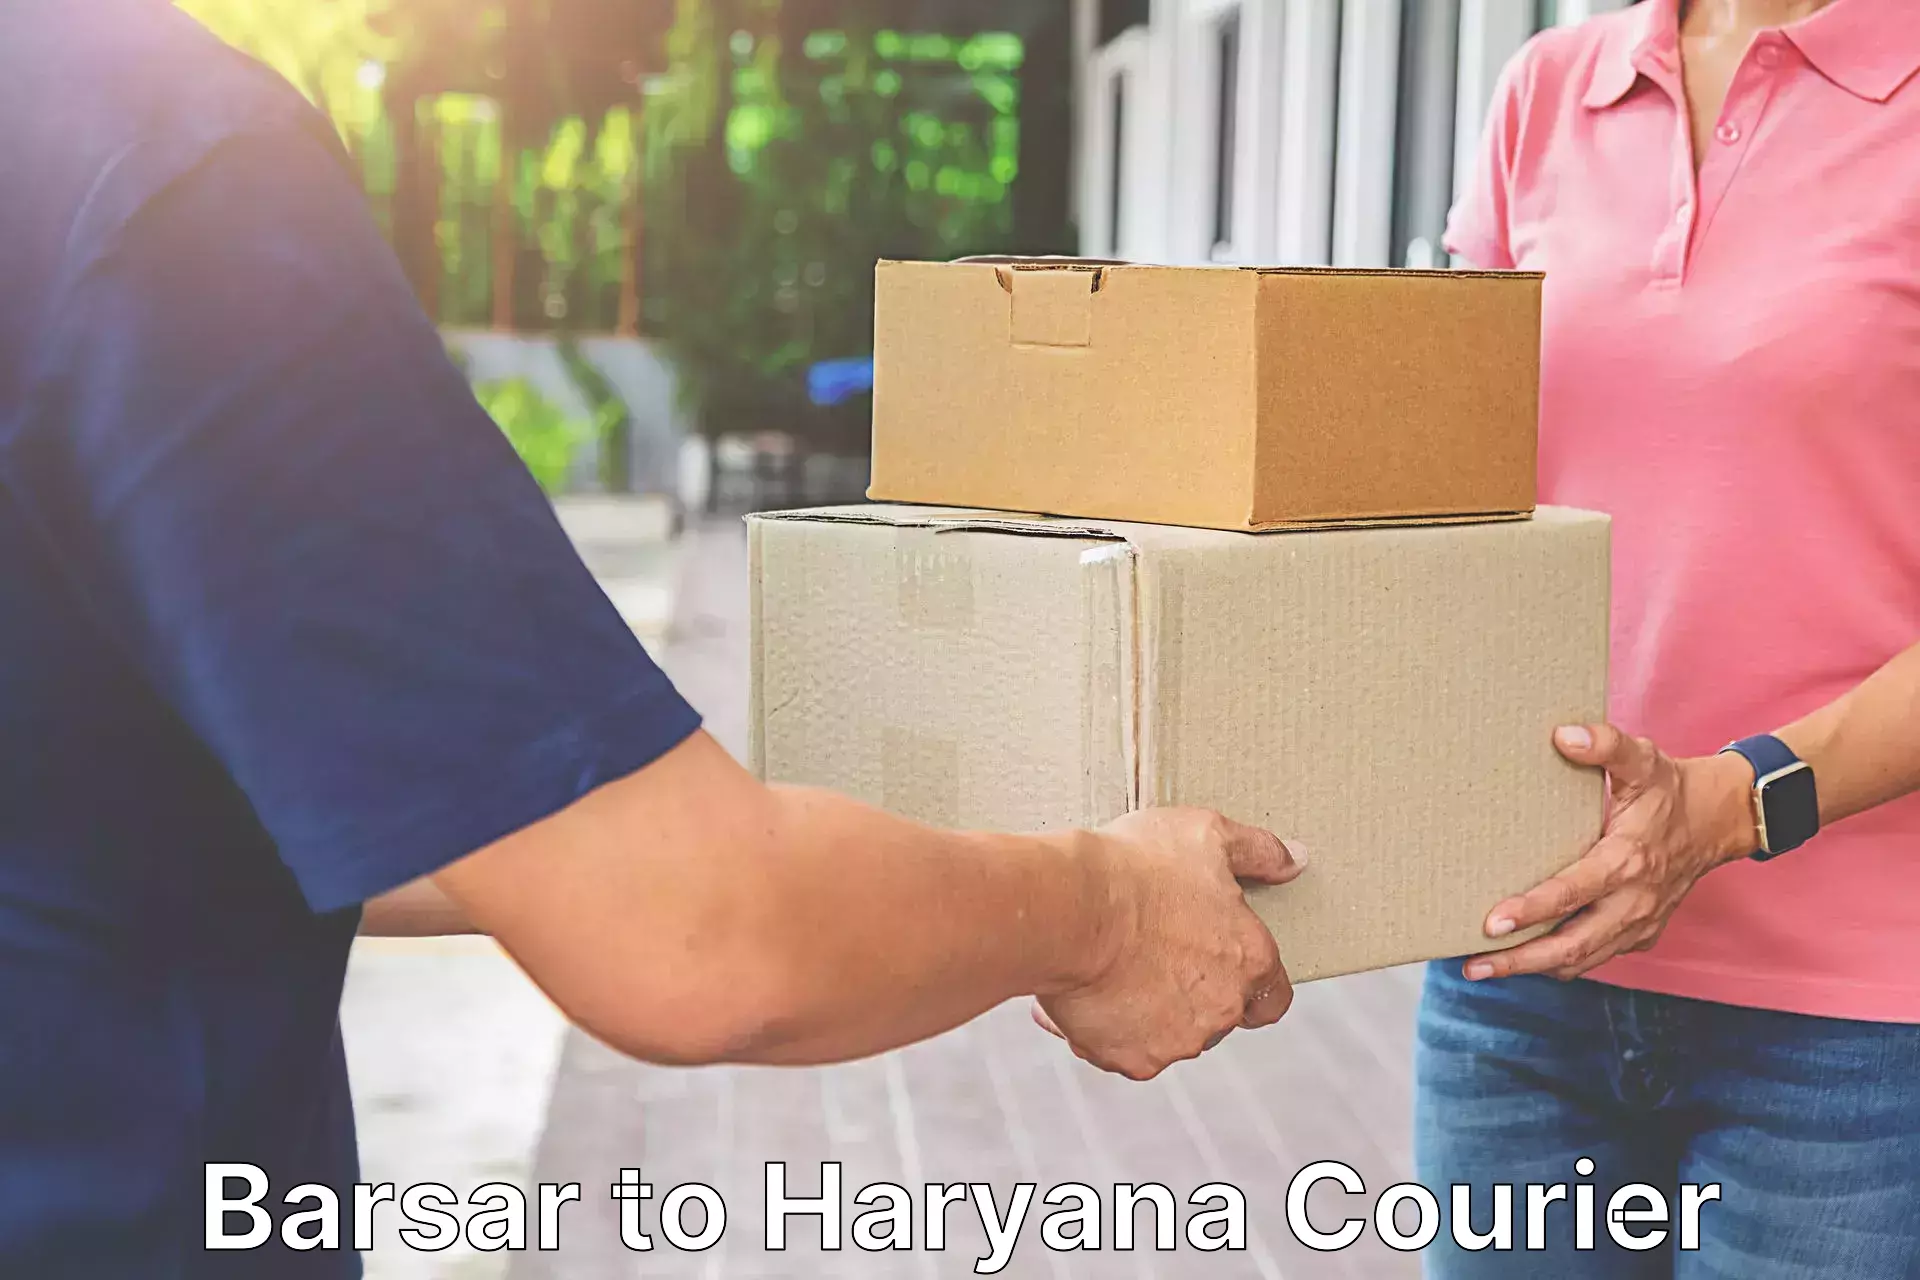 State-of-the-art courier technology Barsar to Haryana